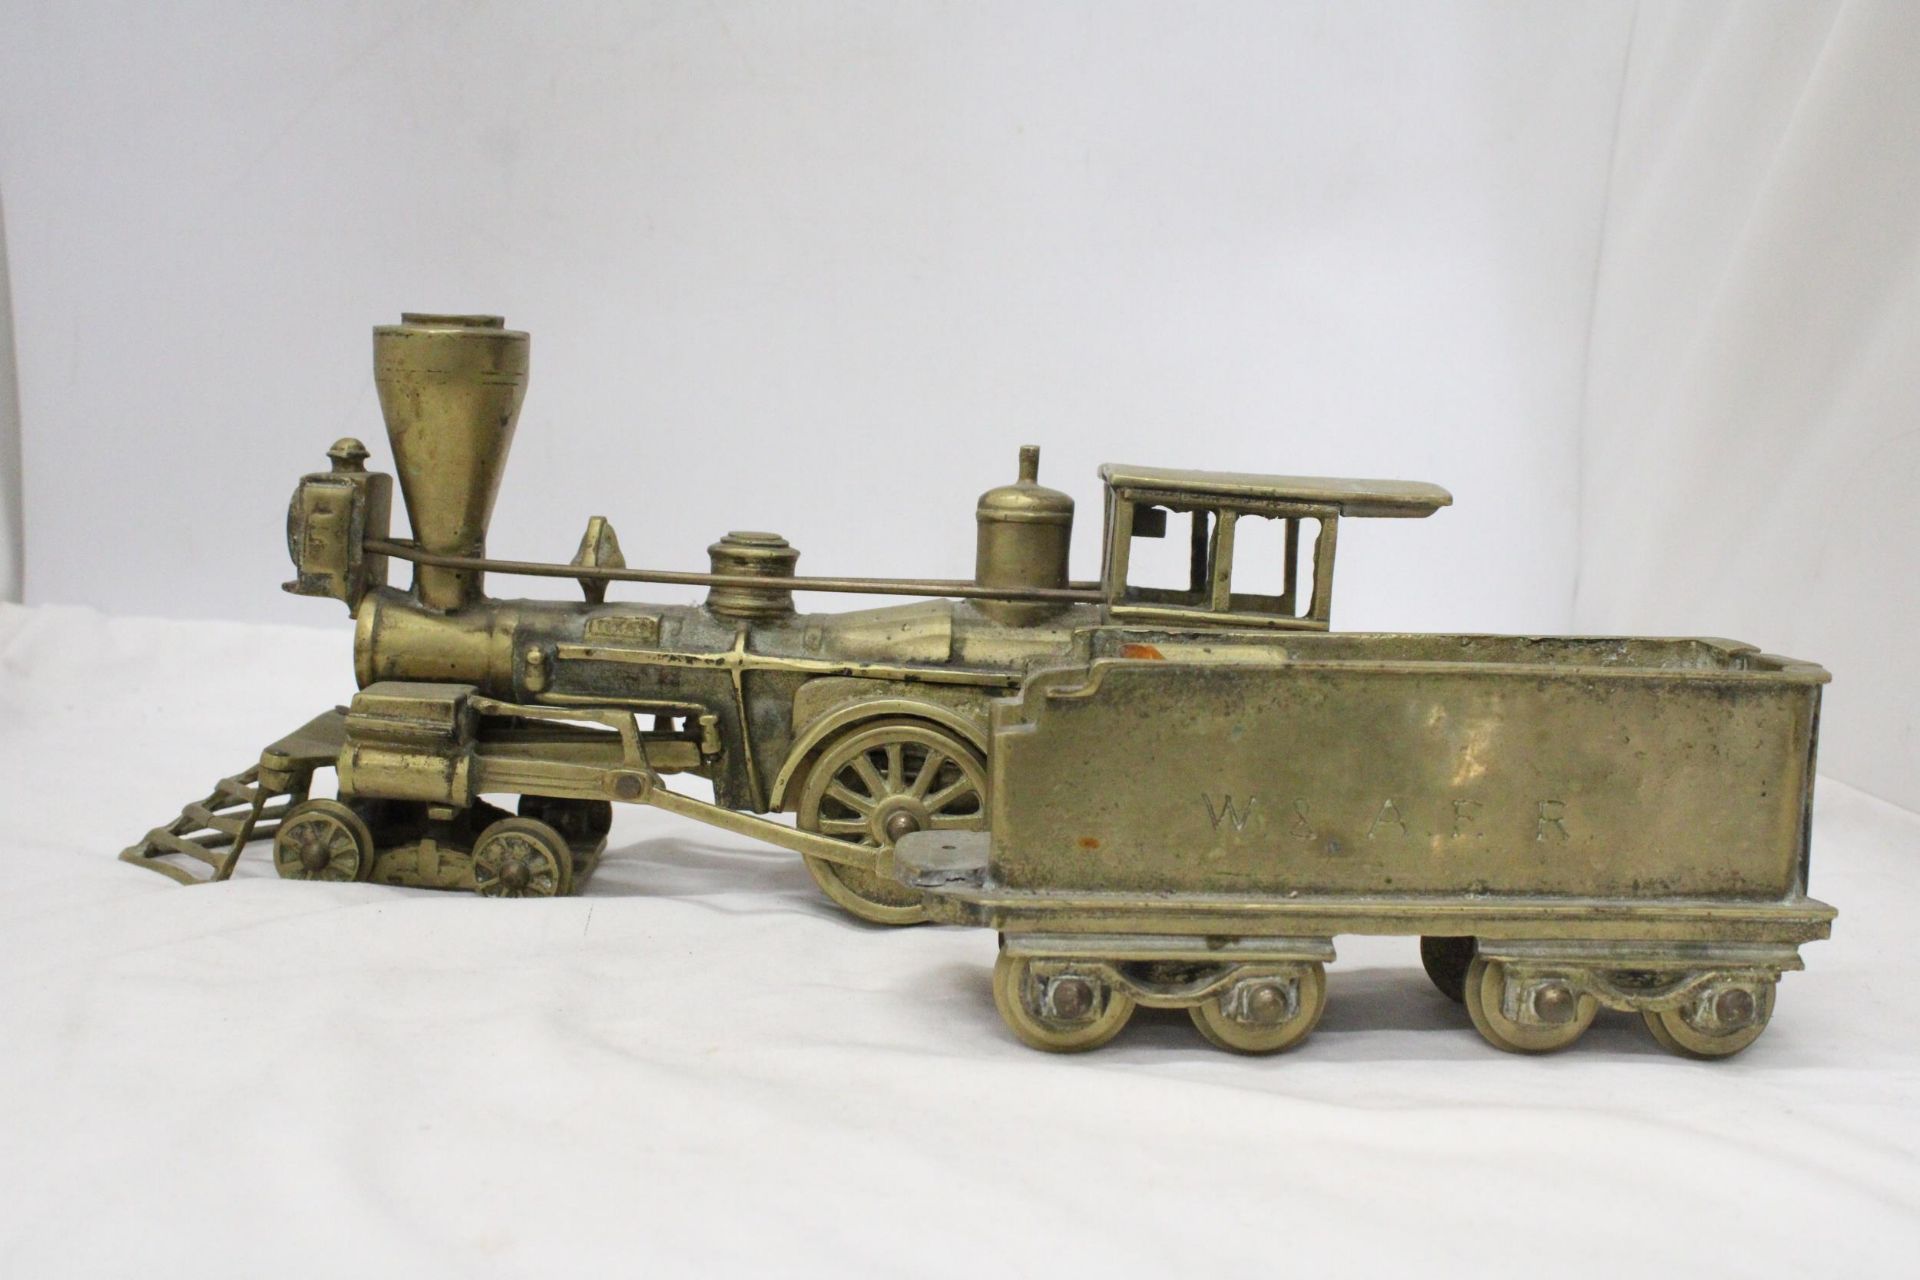 A W & AFR SOLID BRASS RAILROAD USA LOCO AND TENDER - WEIGHTS 6 KILO'S (53 cm) - Image 2 of 7